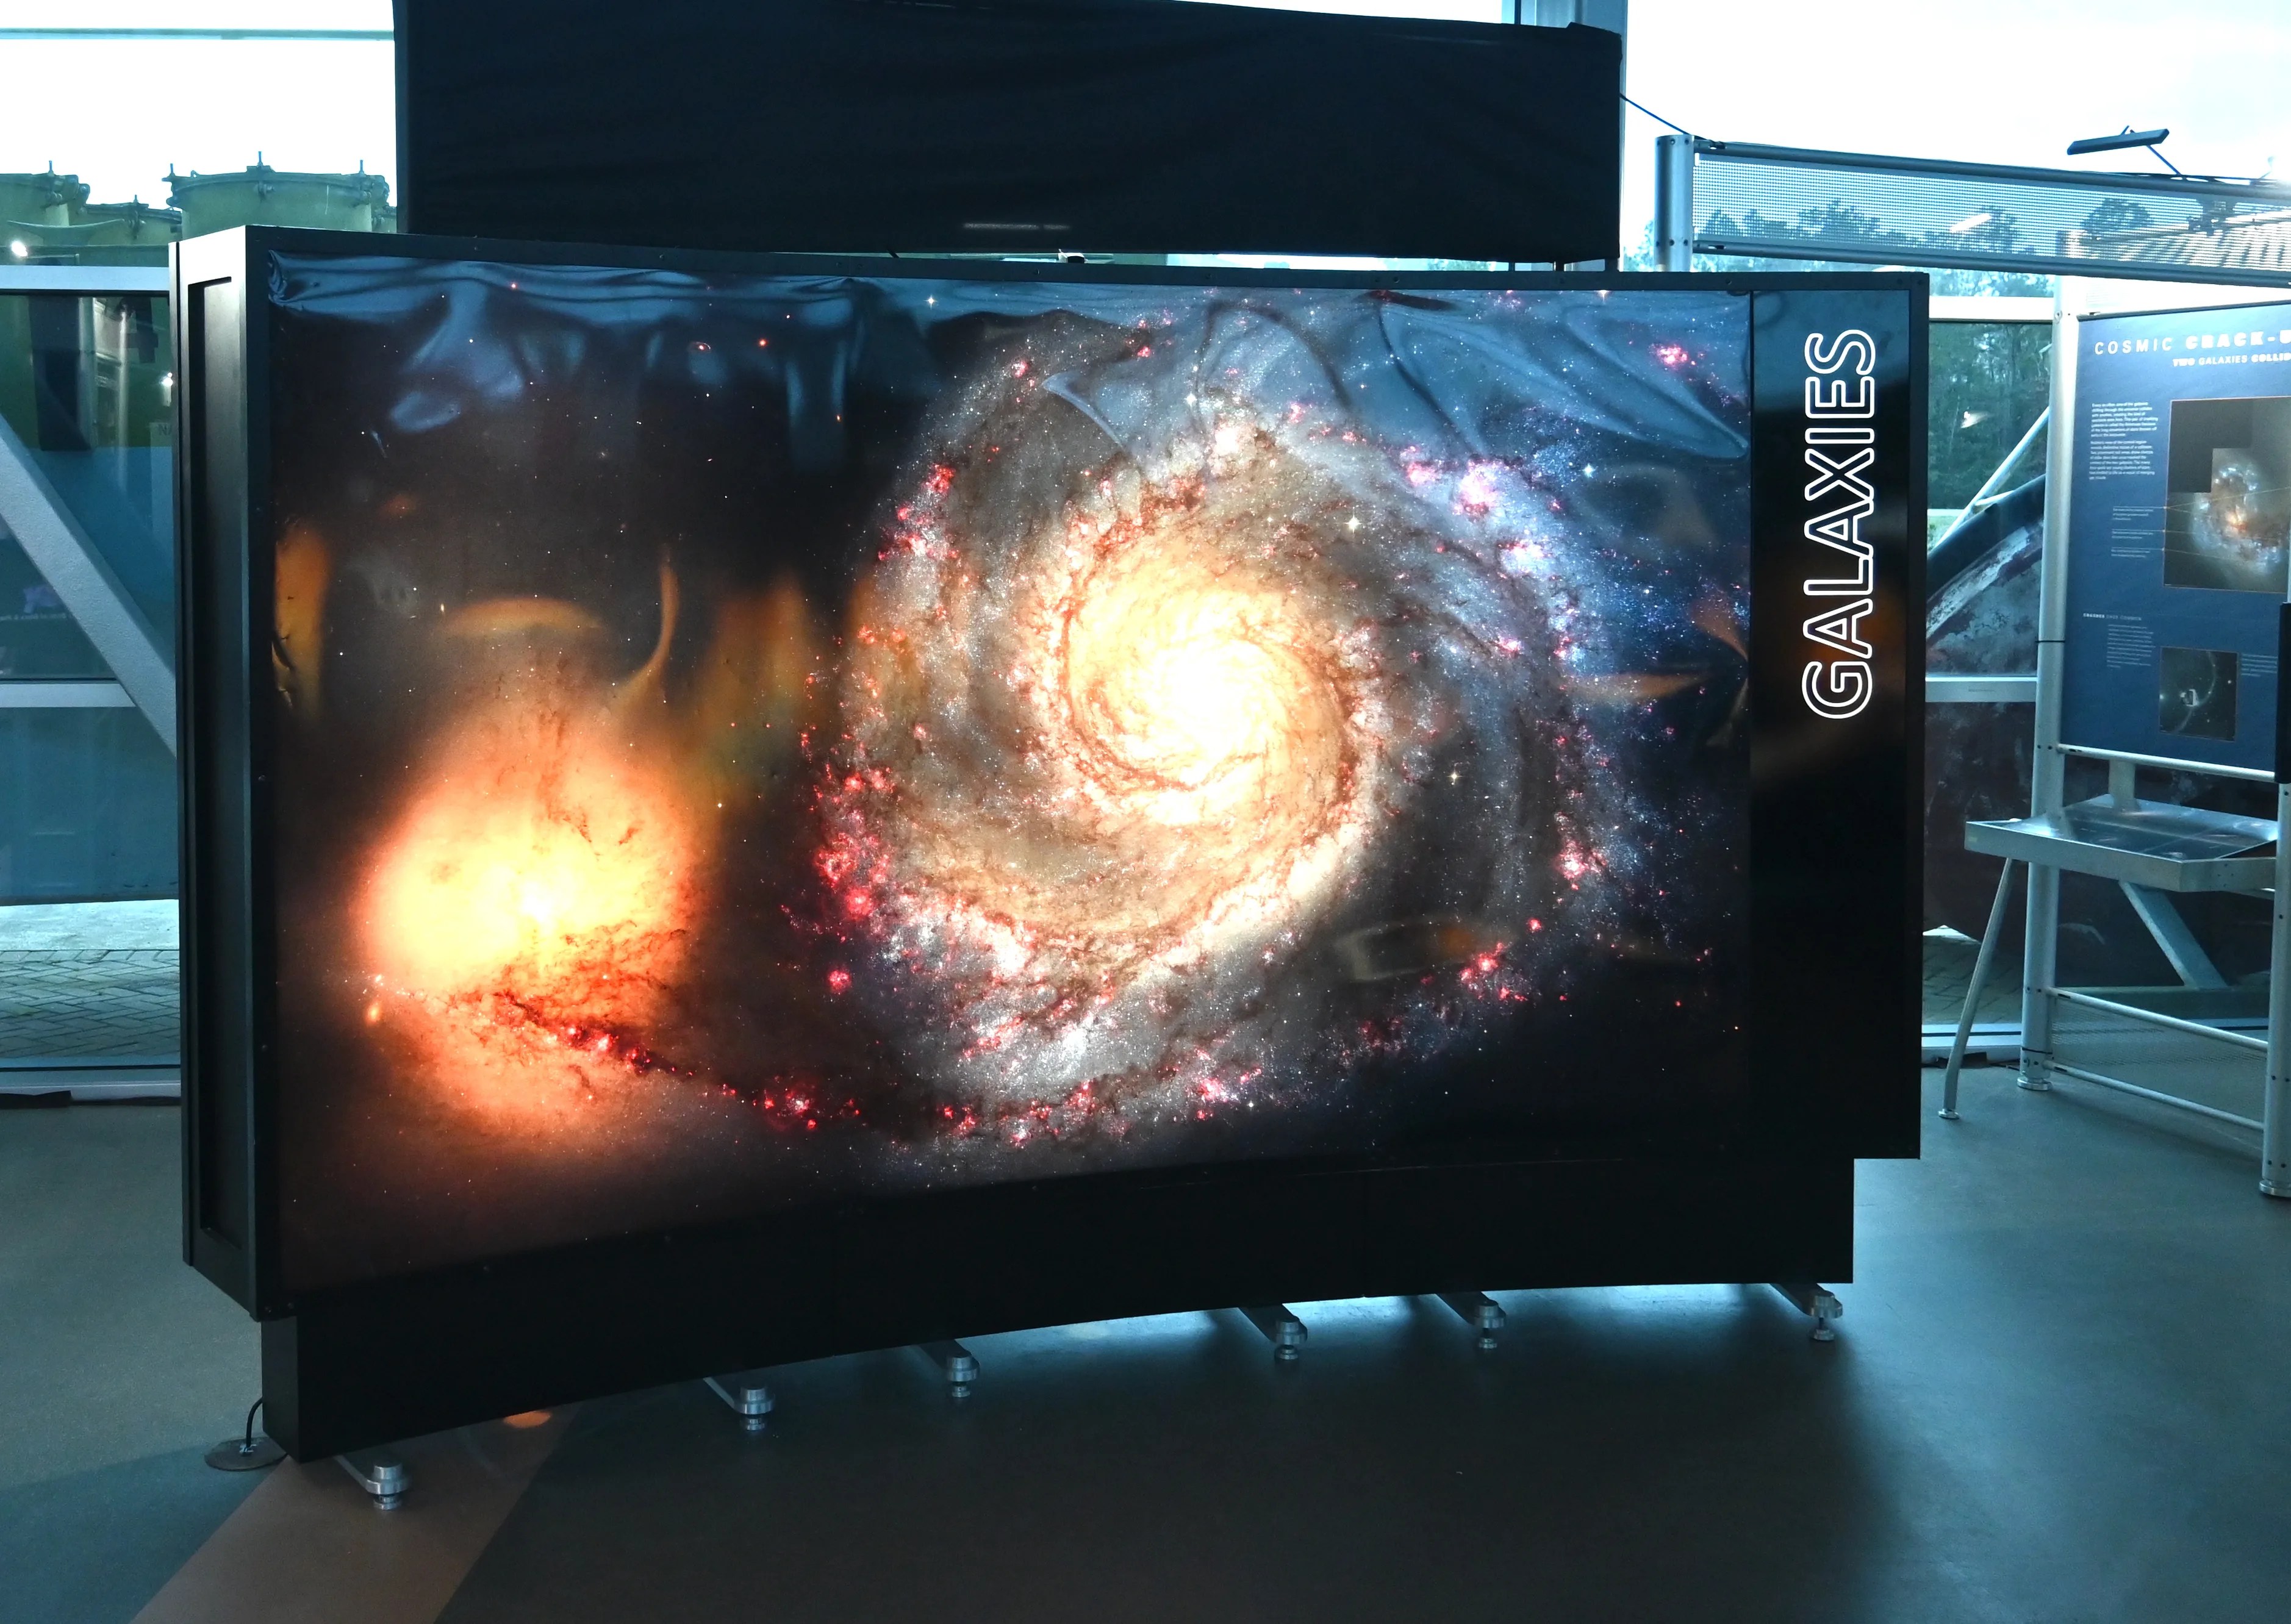 An 11 foot by 6 foot backlit image of the Whirlpool Galaxy